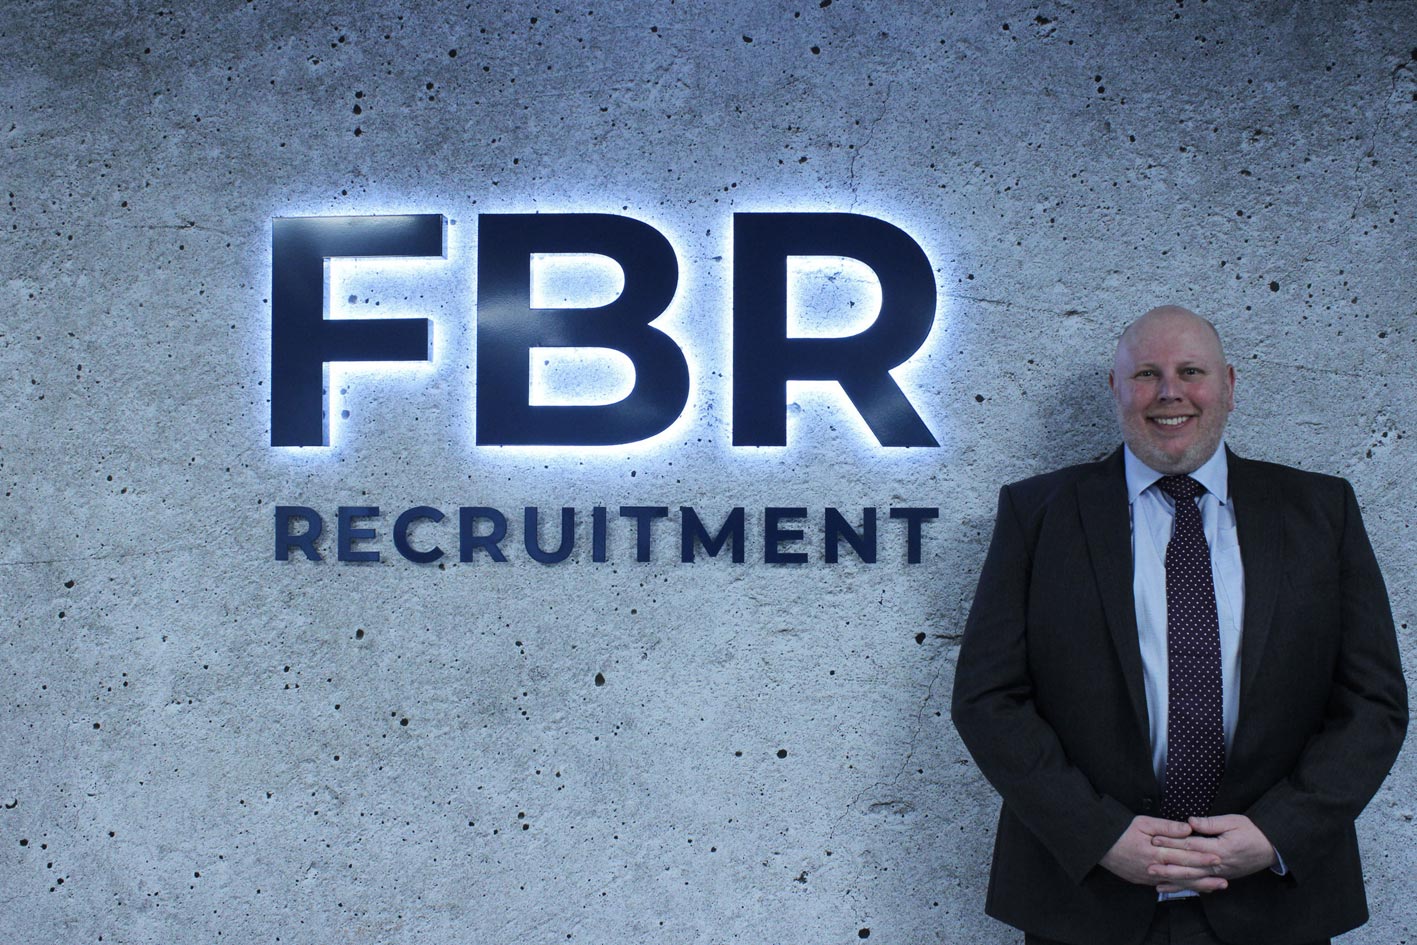 Richard Barnes is a Director at FBR and specialises in recruitment for Trades & Labour (permanent & temporary roles).